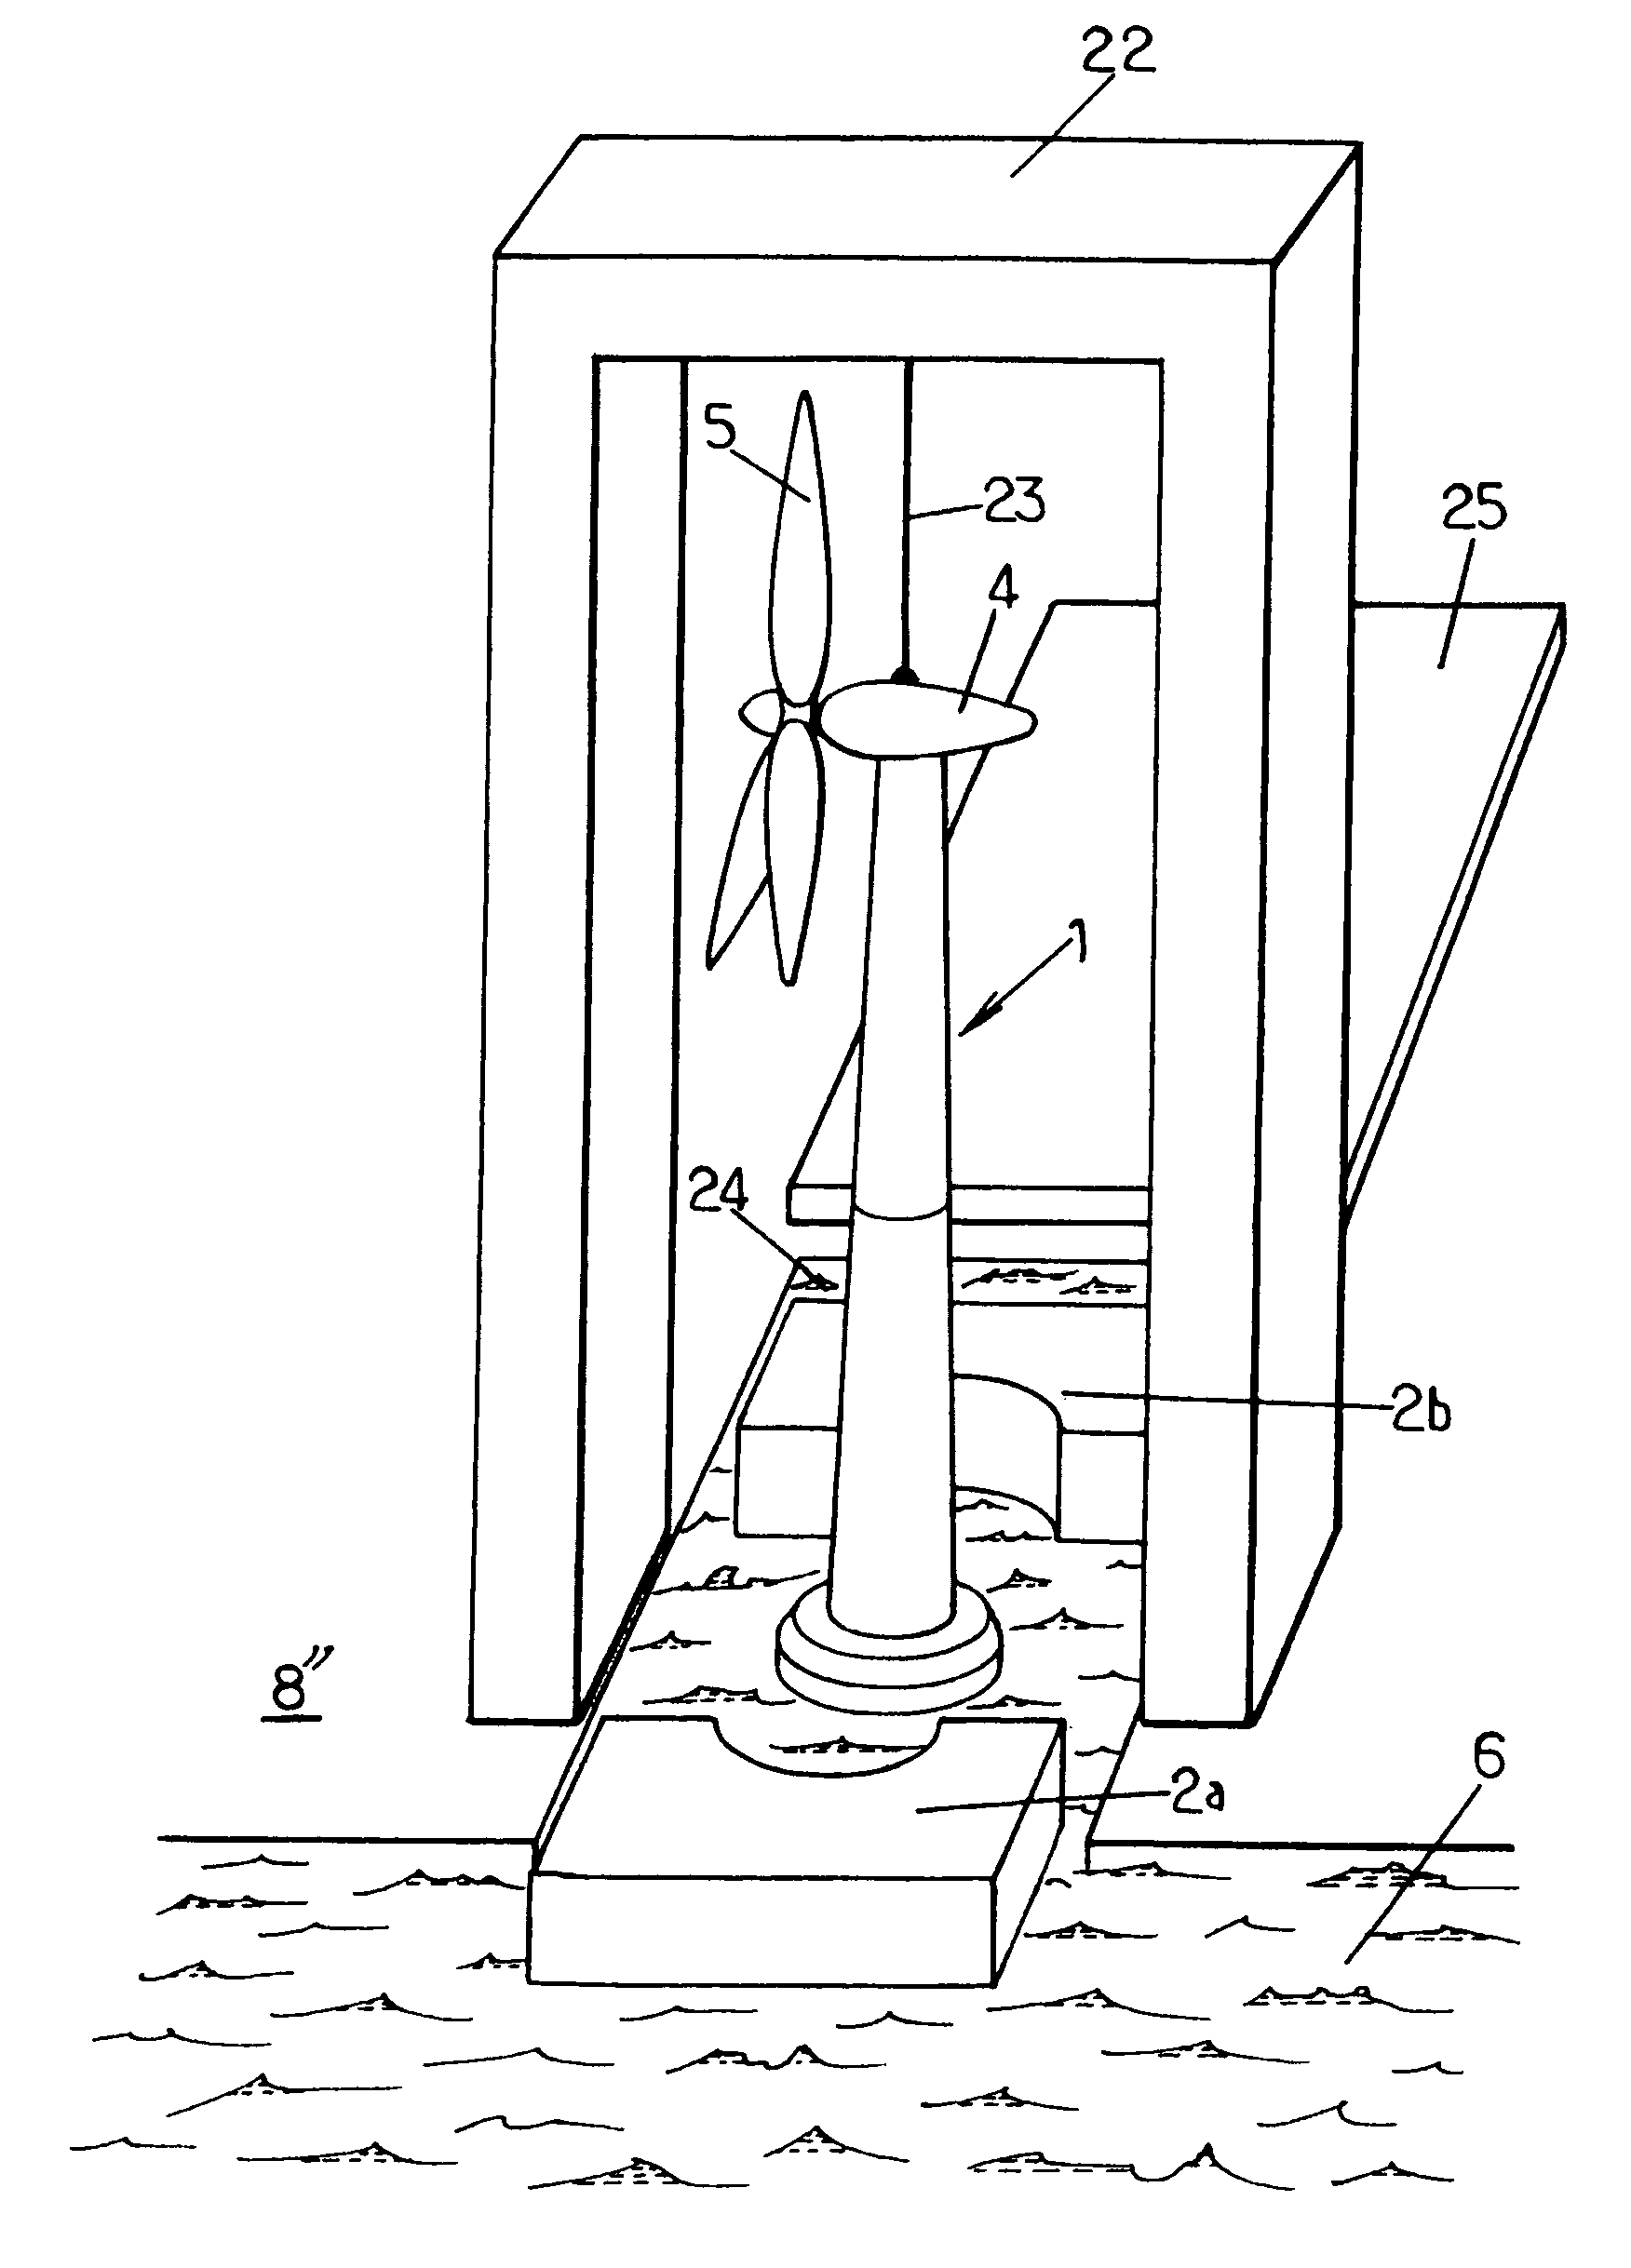 Method for the transport of a civil engineering structure in an aquatic medium